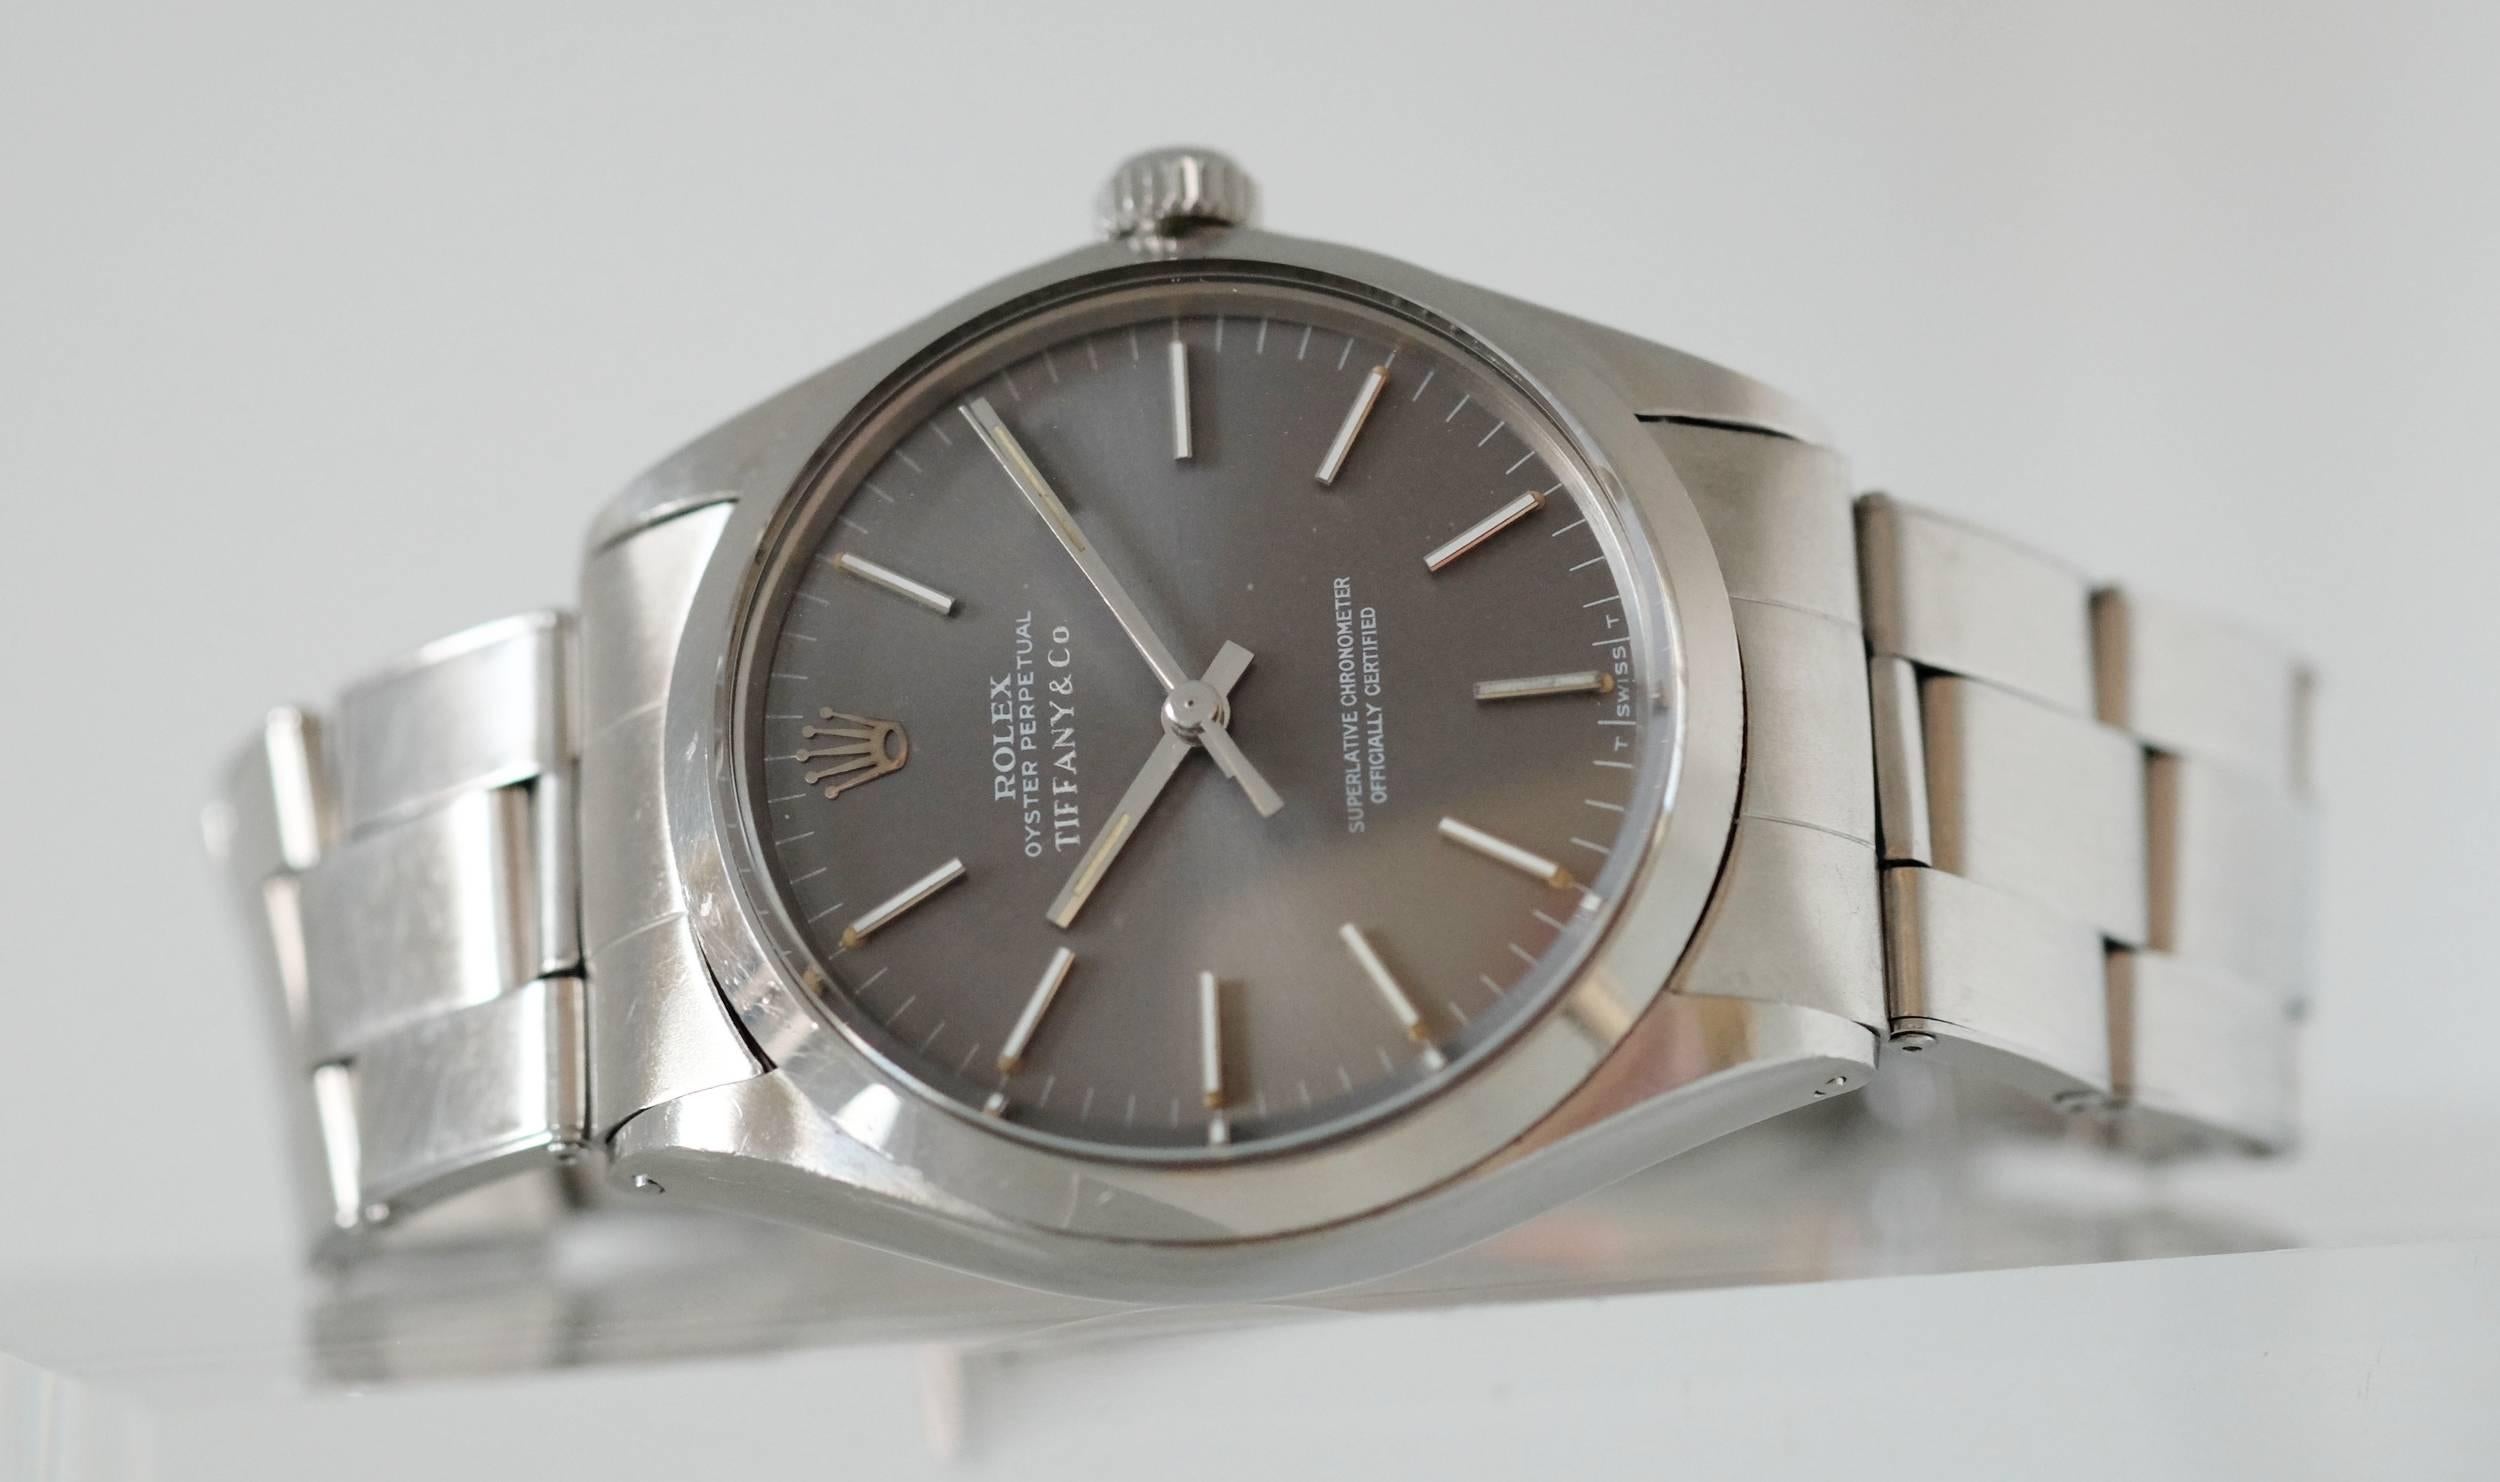 This watch has its original grey dial with perfectly preserved Tiffany Signature from the early 1970's. It is fitted with its original rivet bracelet. This is from a period when Tiffany was  supplying Rolex watches to the New York  clientele such as